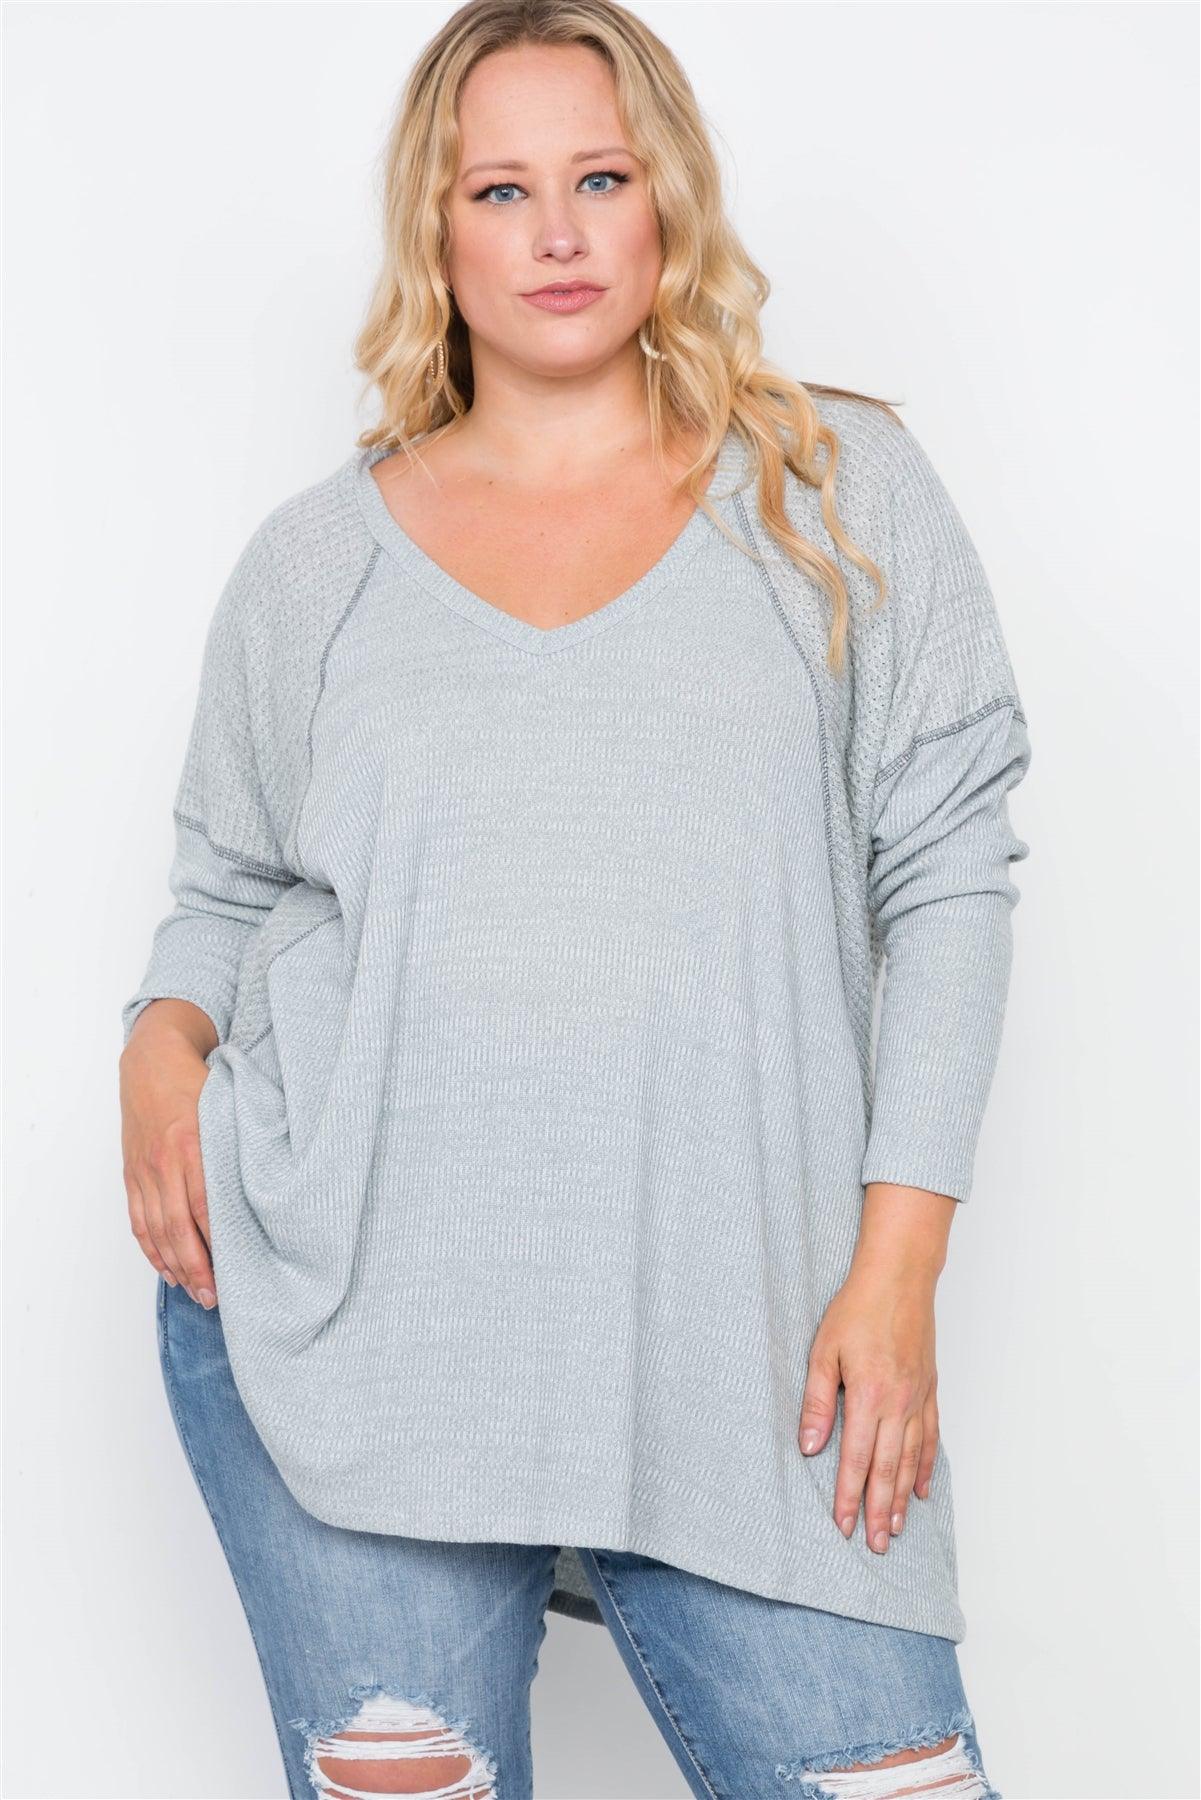 Plus Size Heather Grey Knit Long Sleeve Top /3-2-1